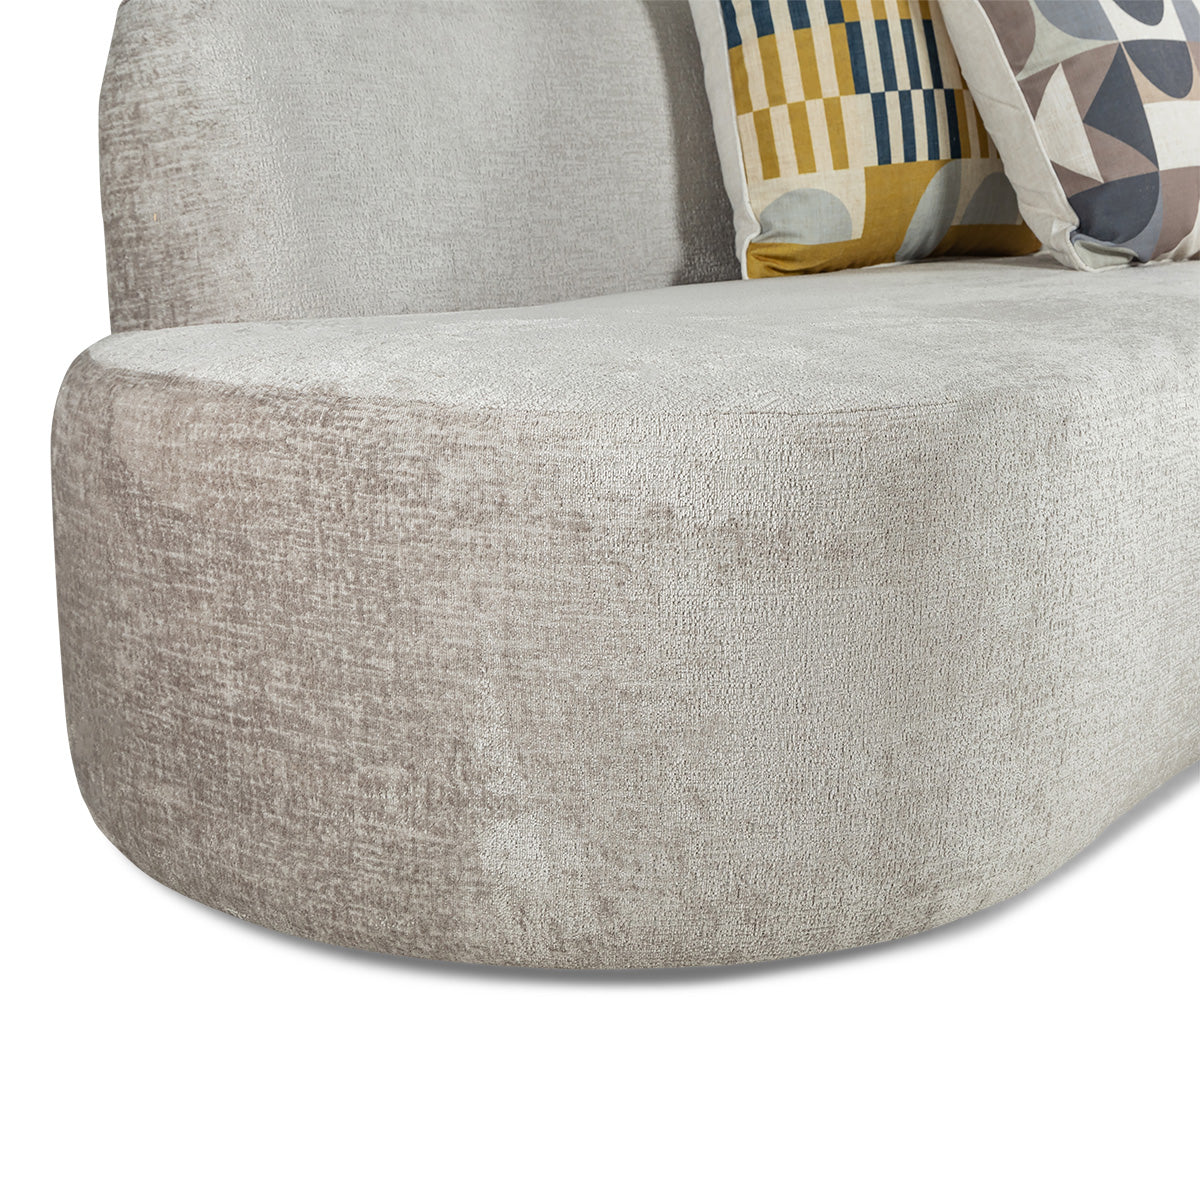 Sag Harbor Sofa in Poodle Taupe